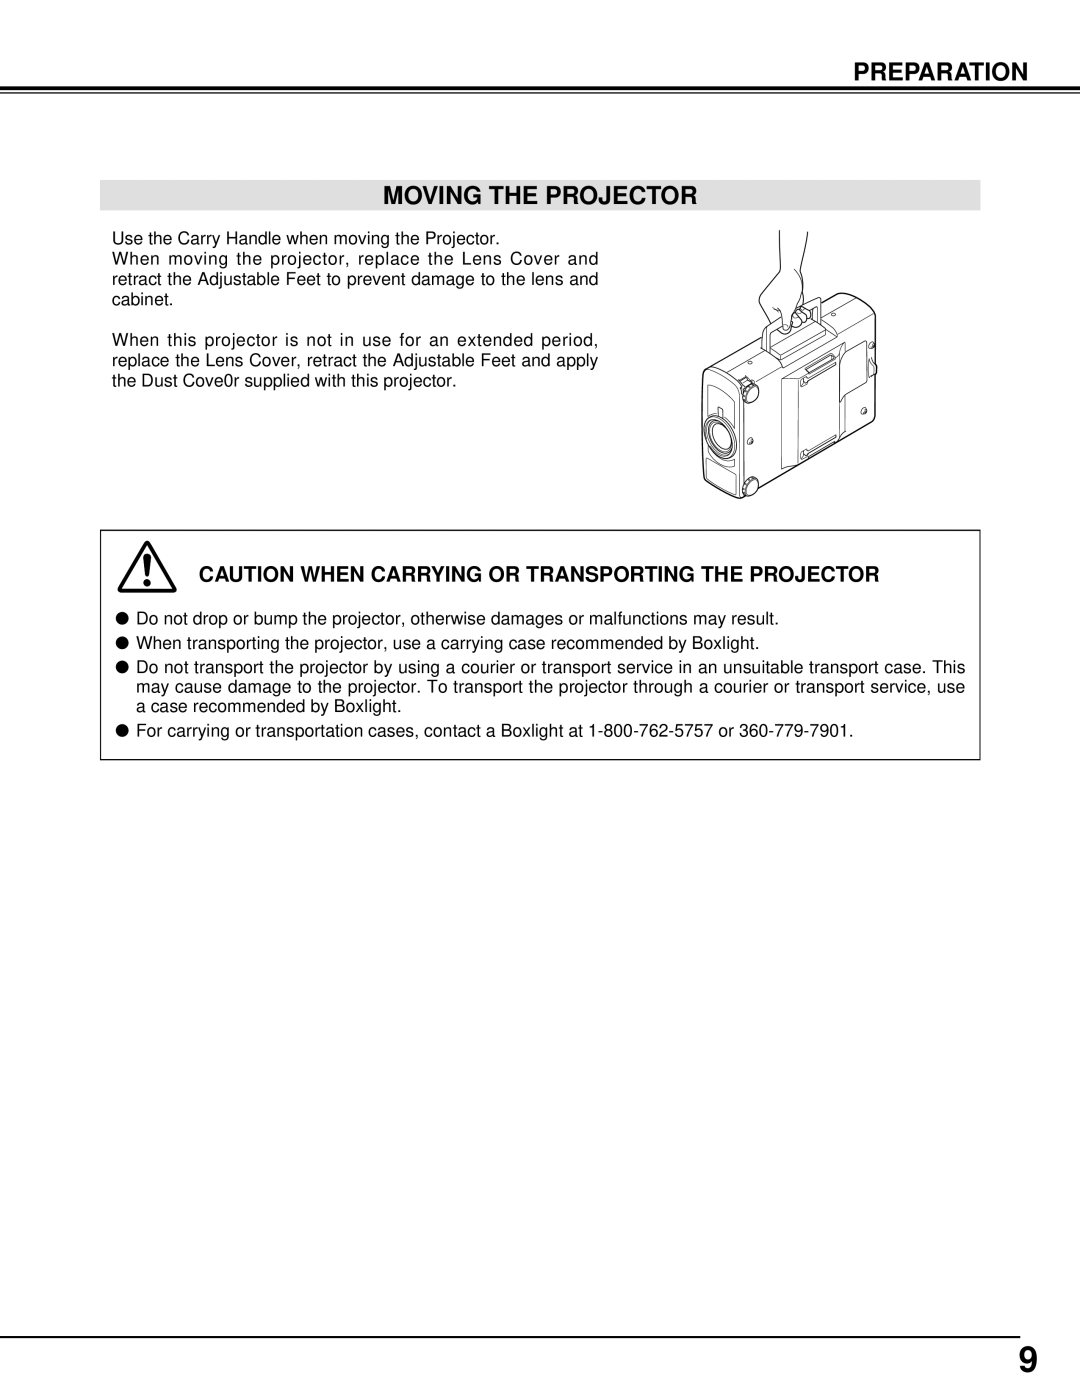 BOXLIGHT CP-33t manual Preparation Moving The Projector, Caution When Carrying Or Transporting The Projector 